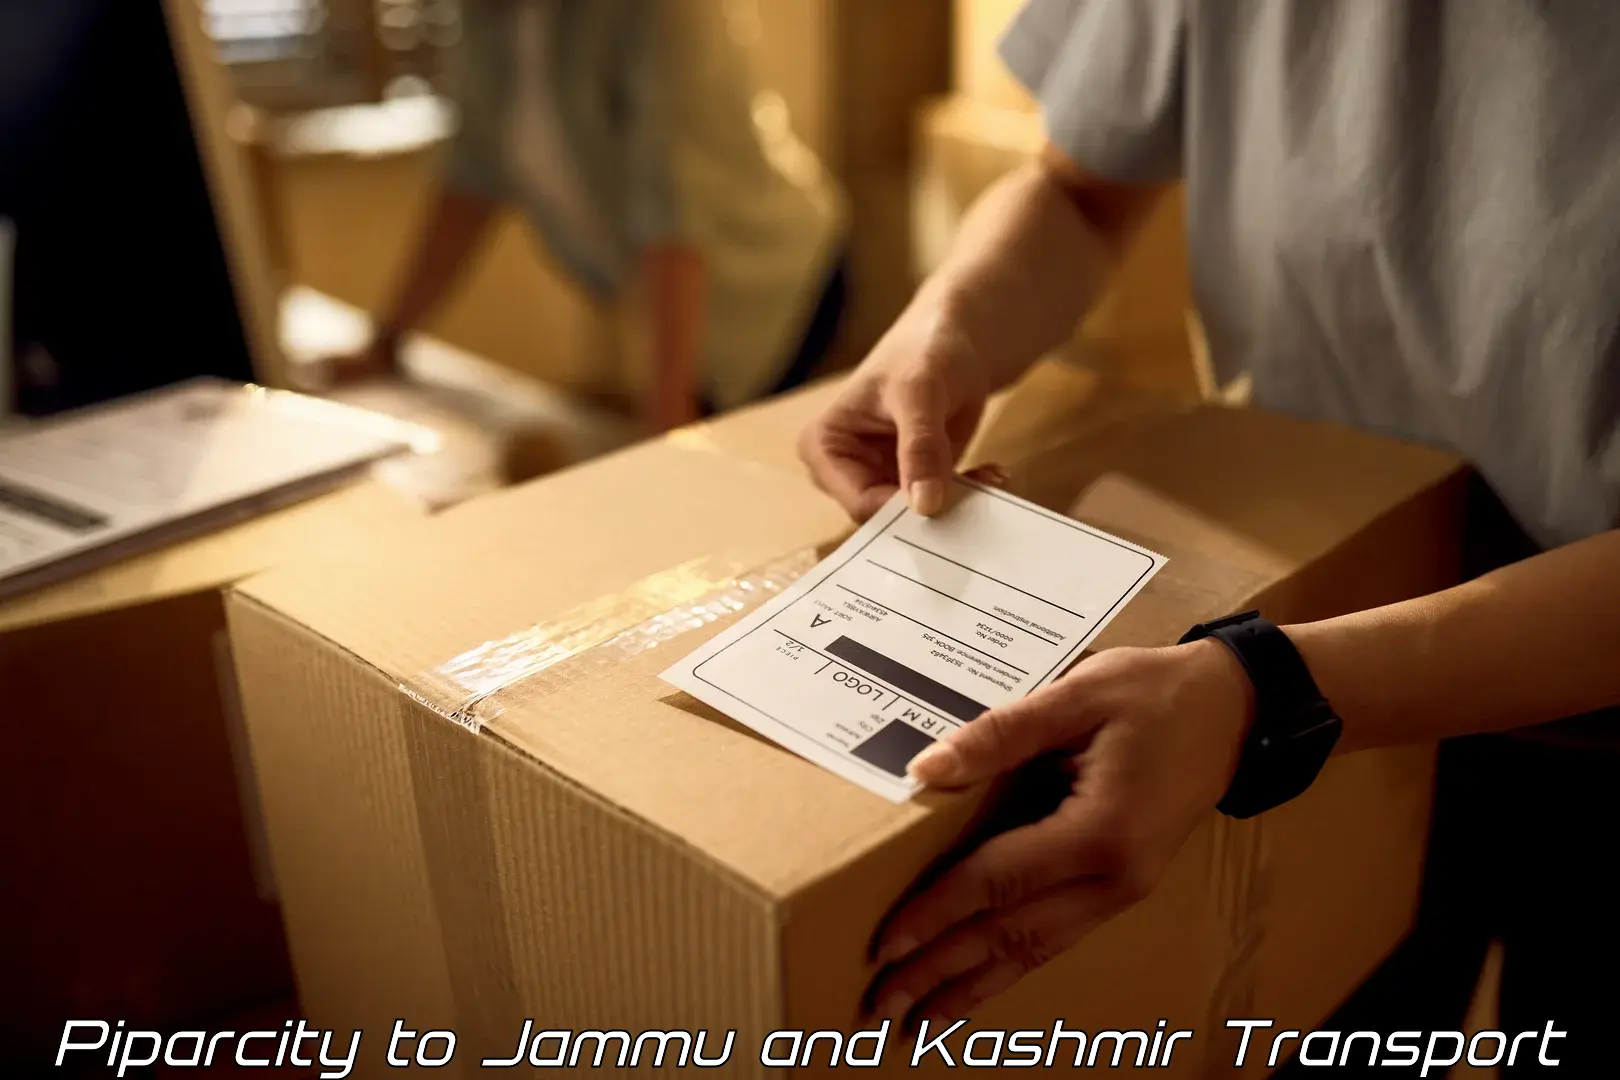 Daily transport service Piparcity to Jammu and Kashmir